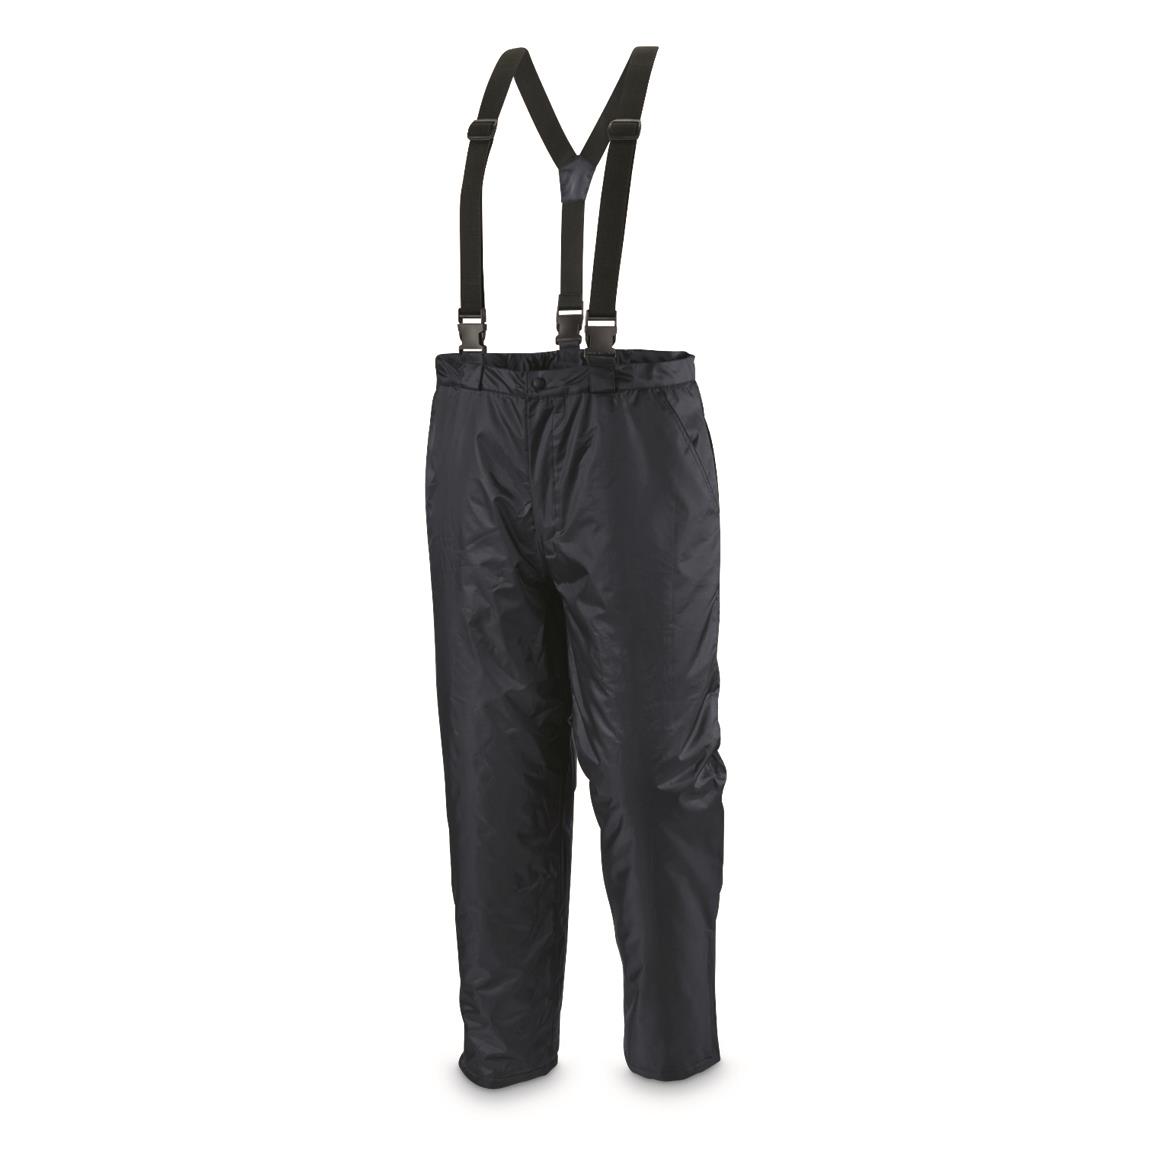 Mil-Tec Military-Style Thermal Quilted Pants with Suspenders, Navy